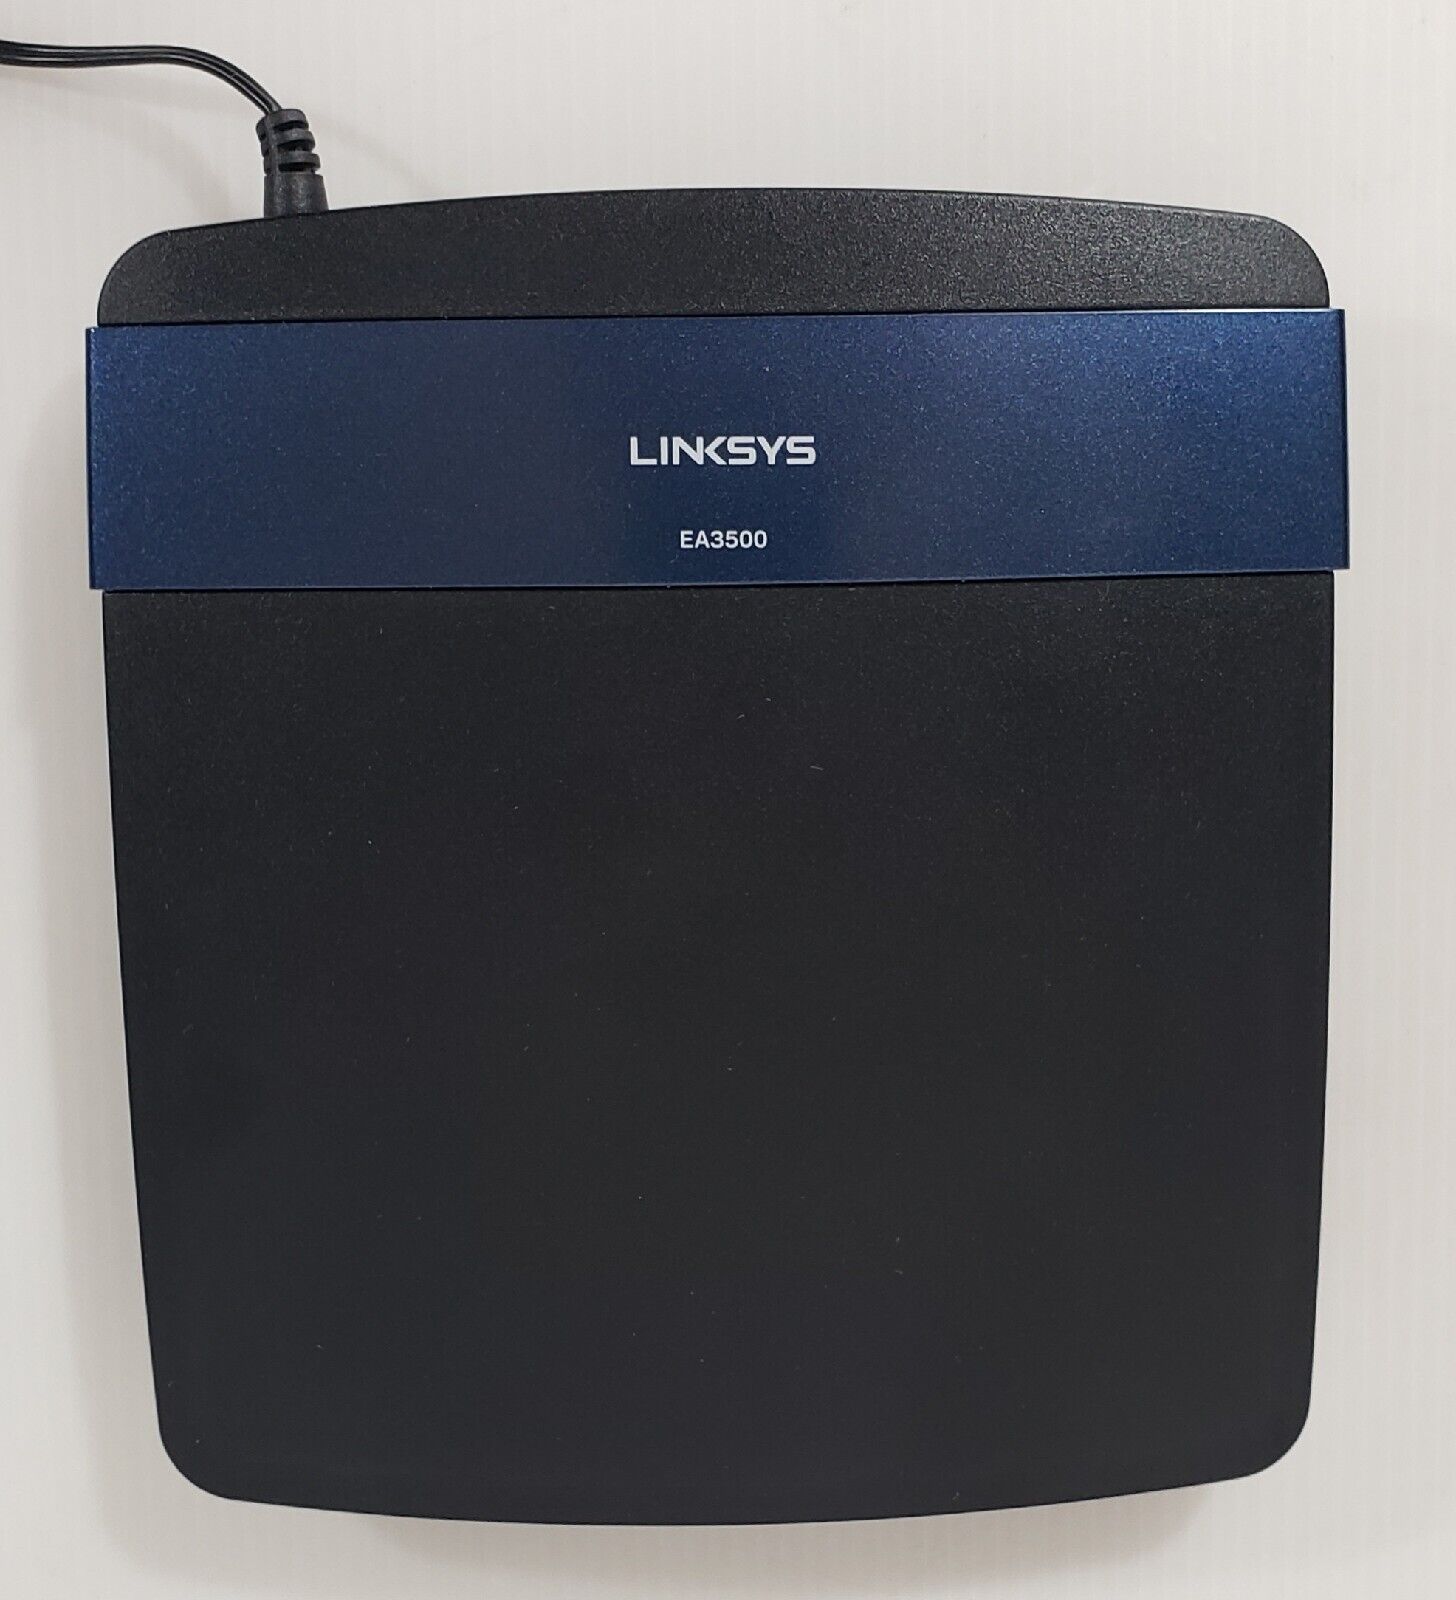 Linksys EA3500 Dual Band Router 